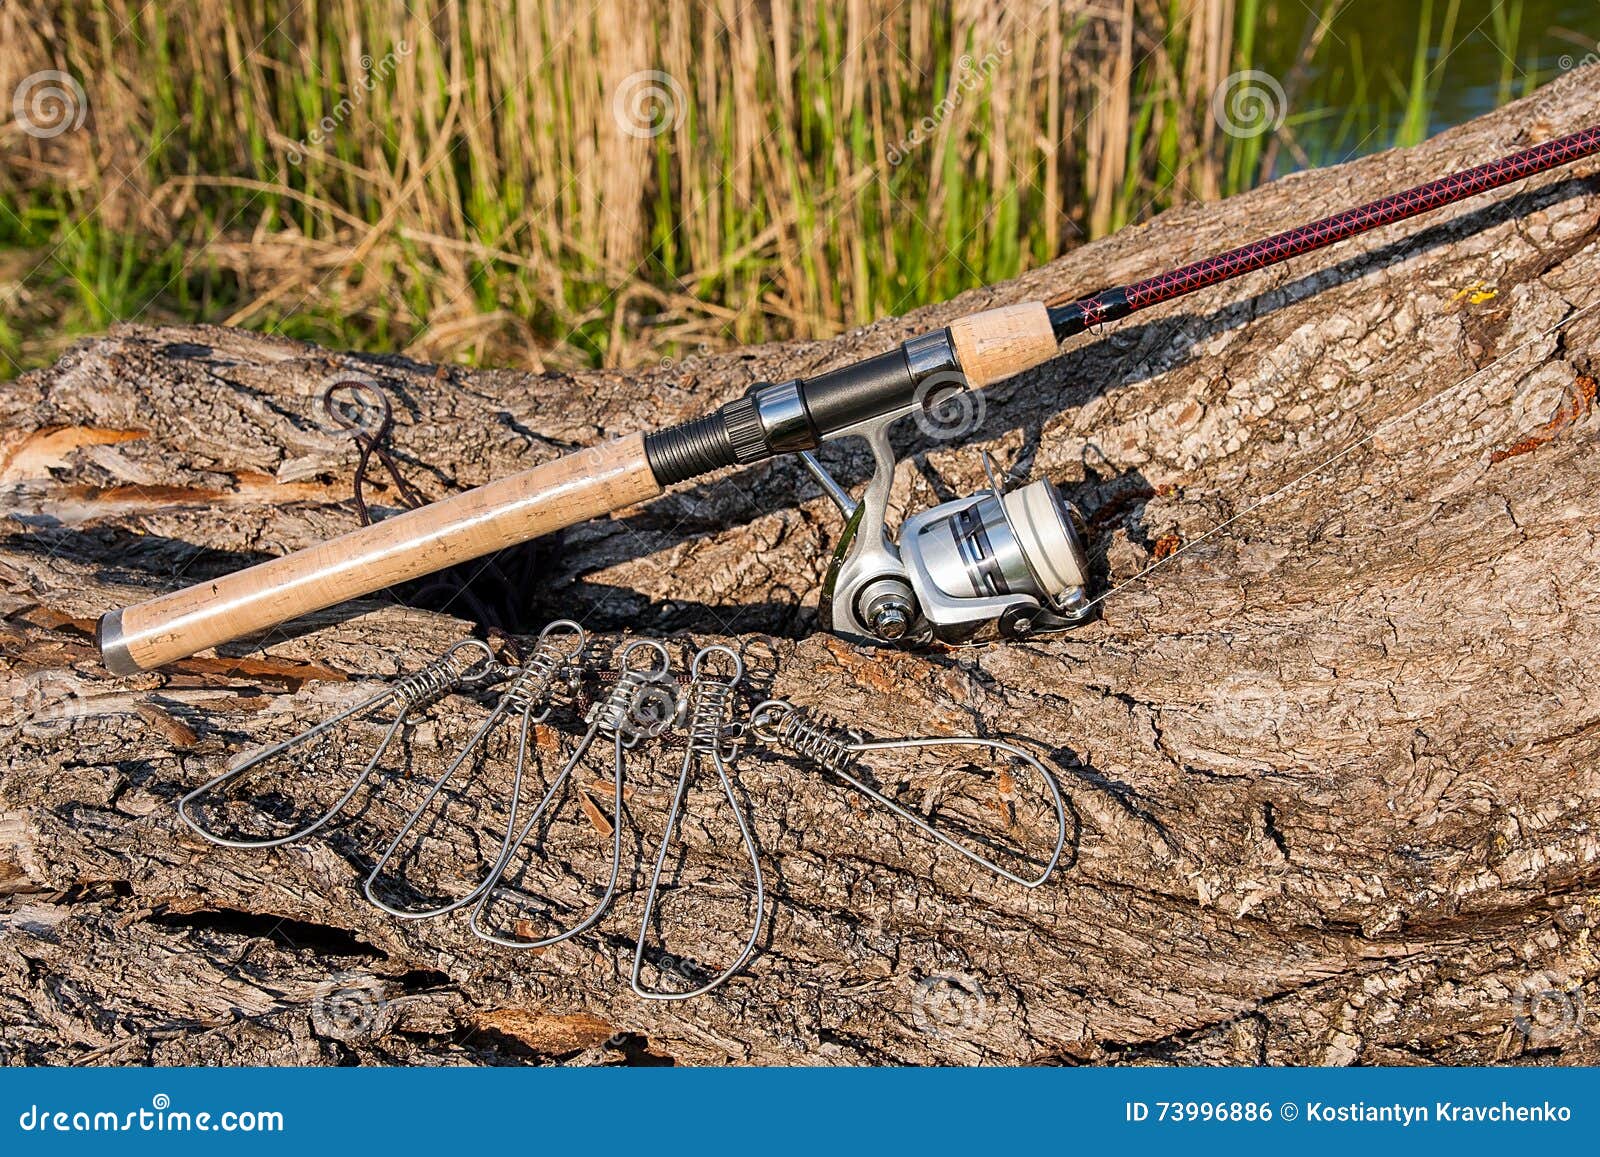 Fishing Rod and Reel on the Natural Background. Fish Stringer